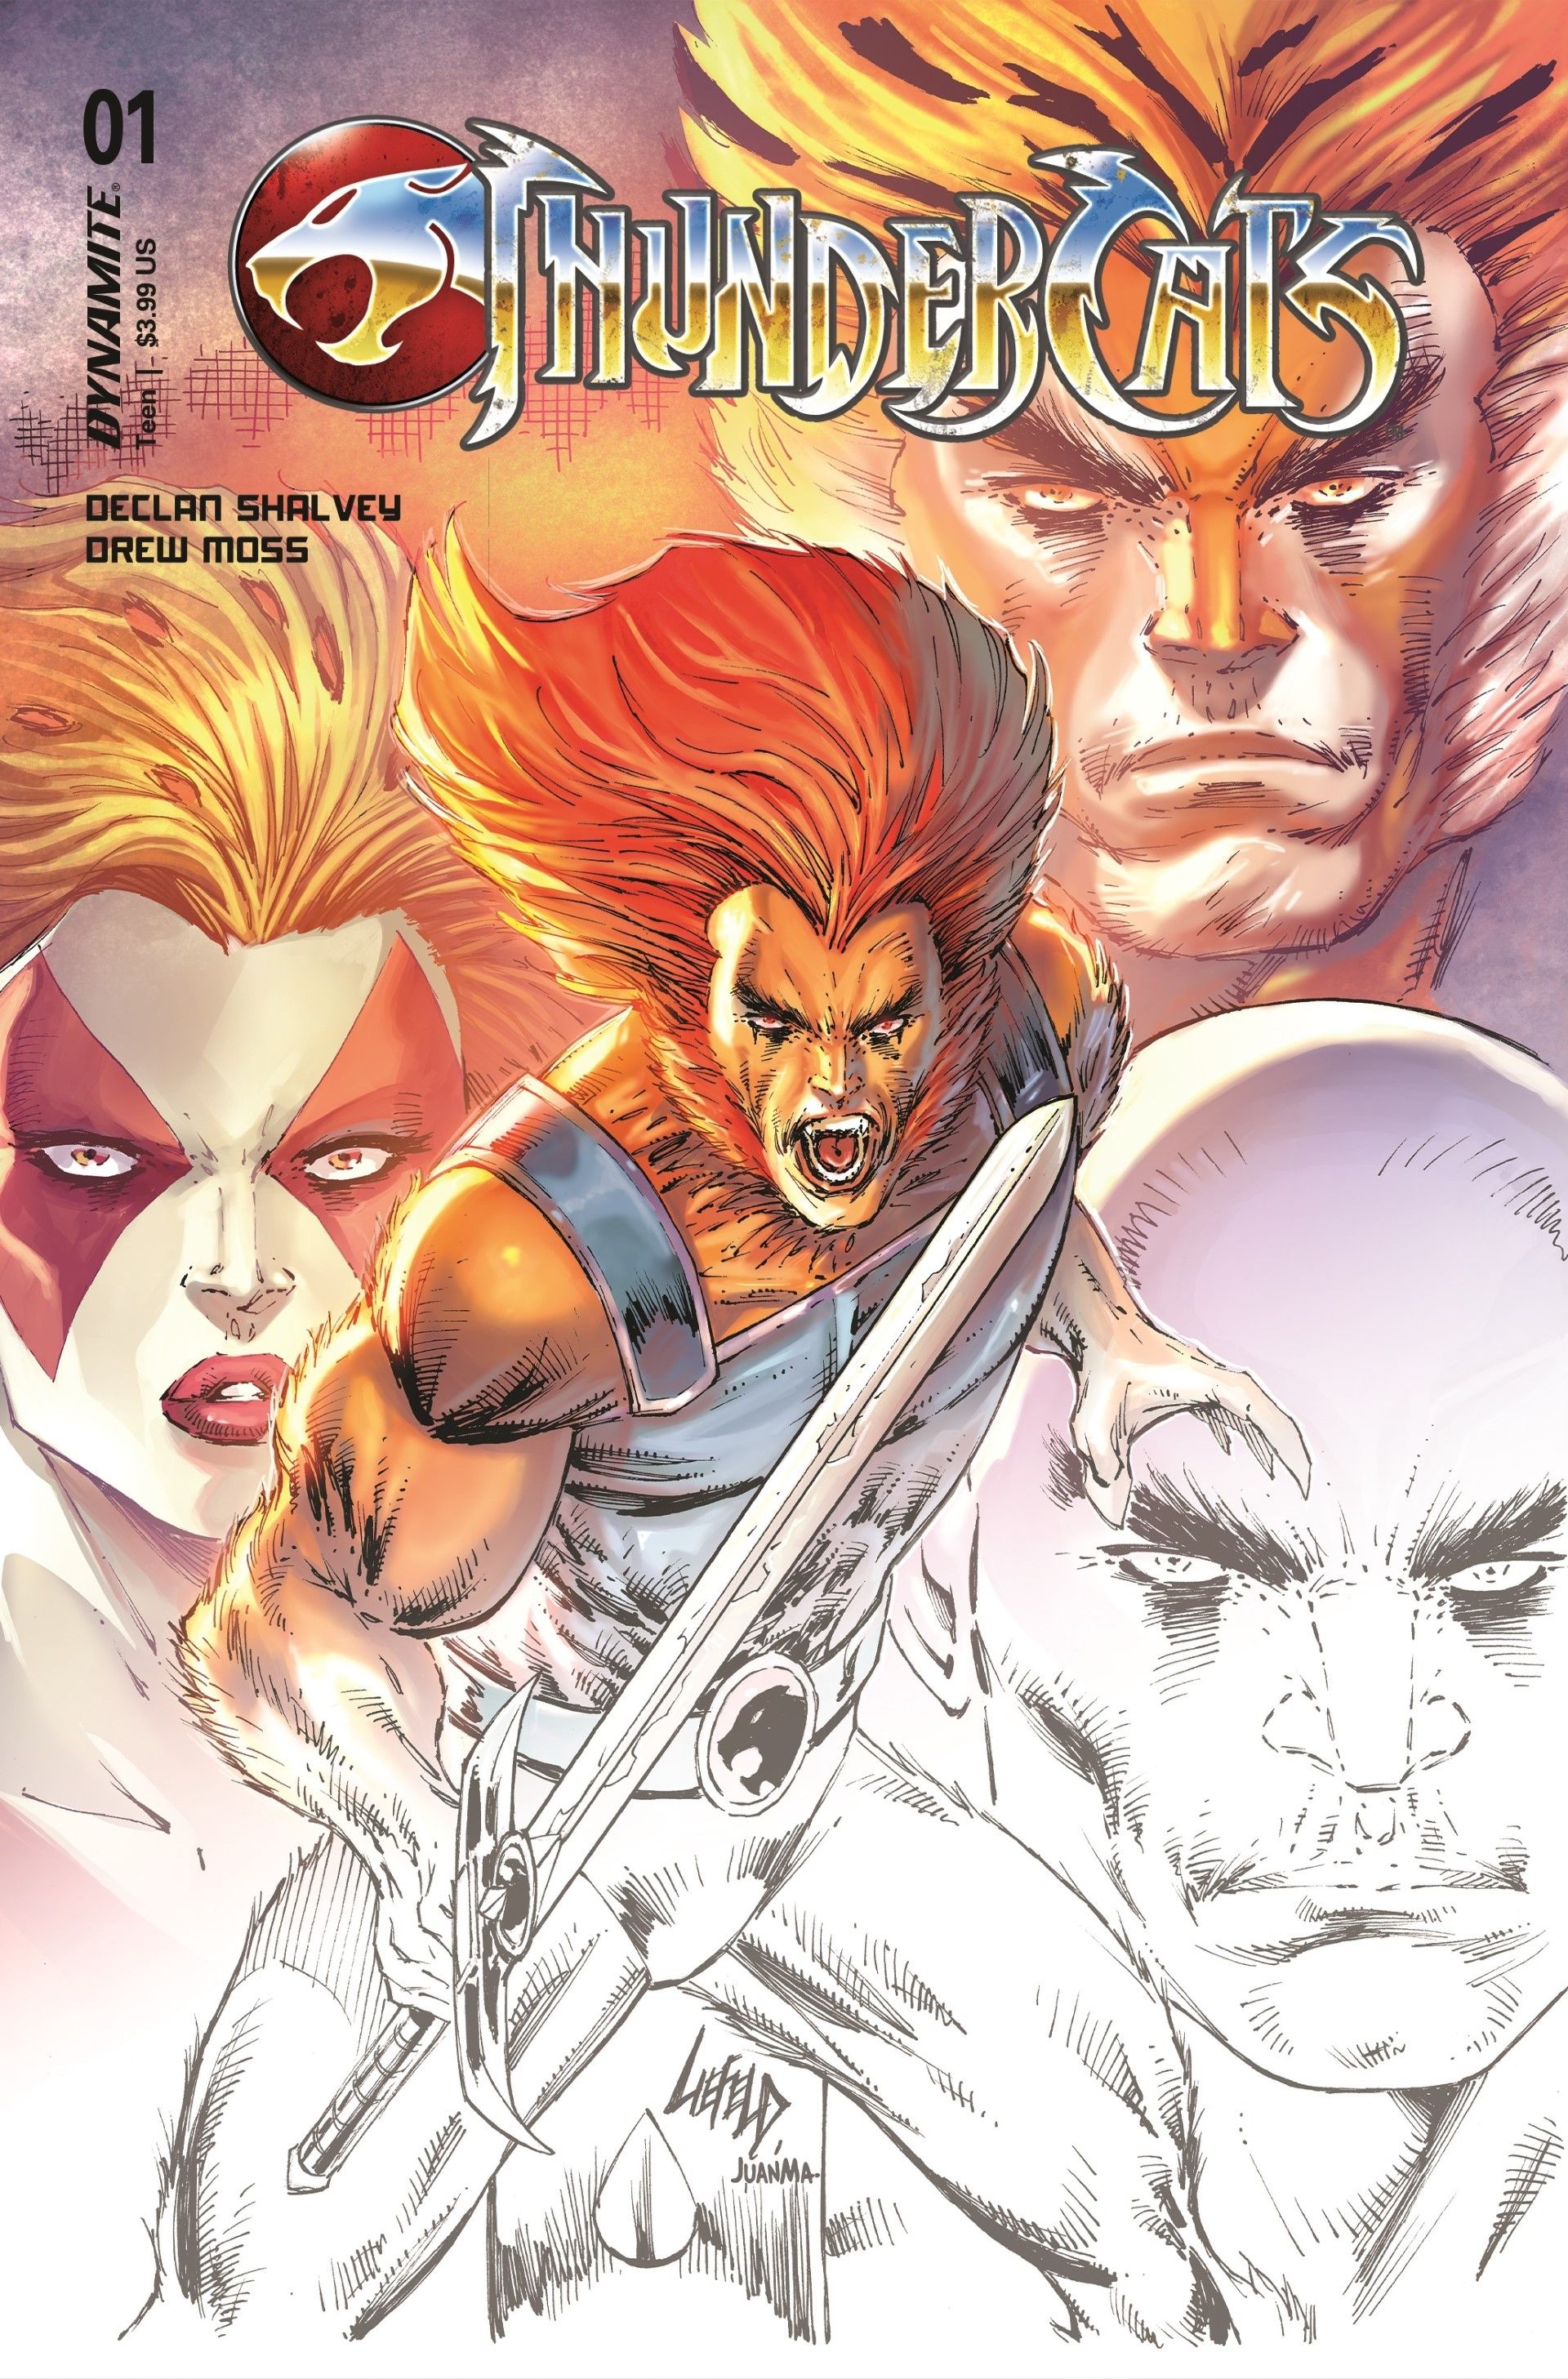 The second printing cover of Thundercats #1